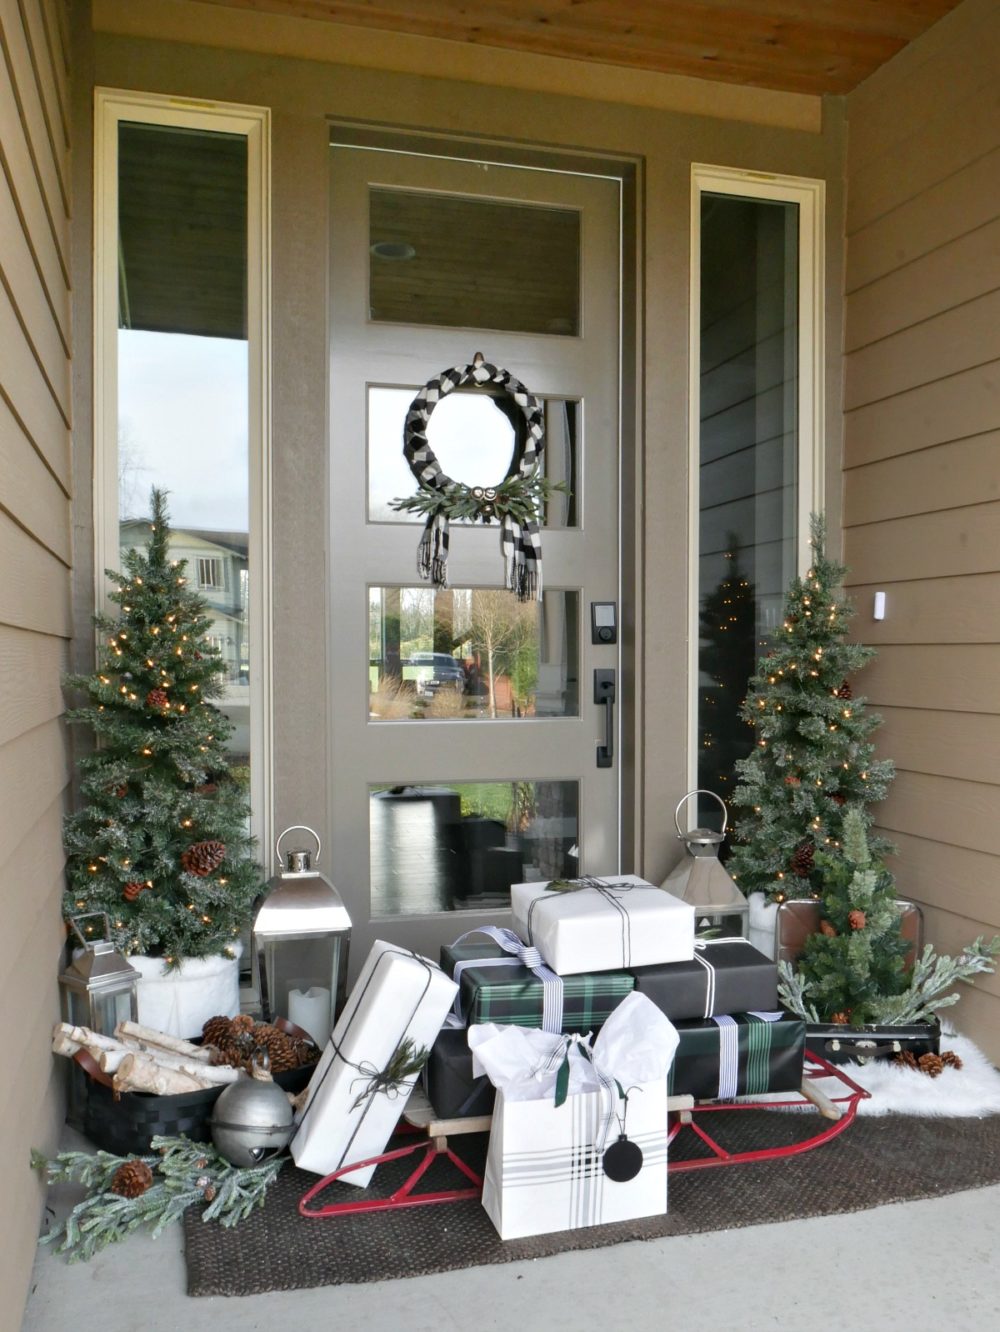 Green and Black Christmas Porch featuring mini trees, a sweater wreath and lots of wintery accents for a festive yet elegant look!